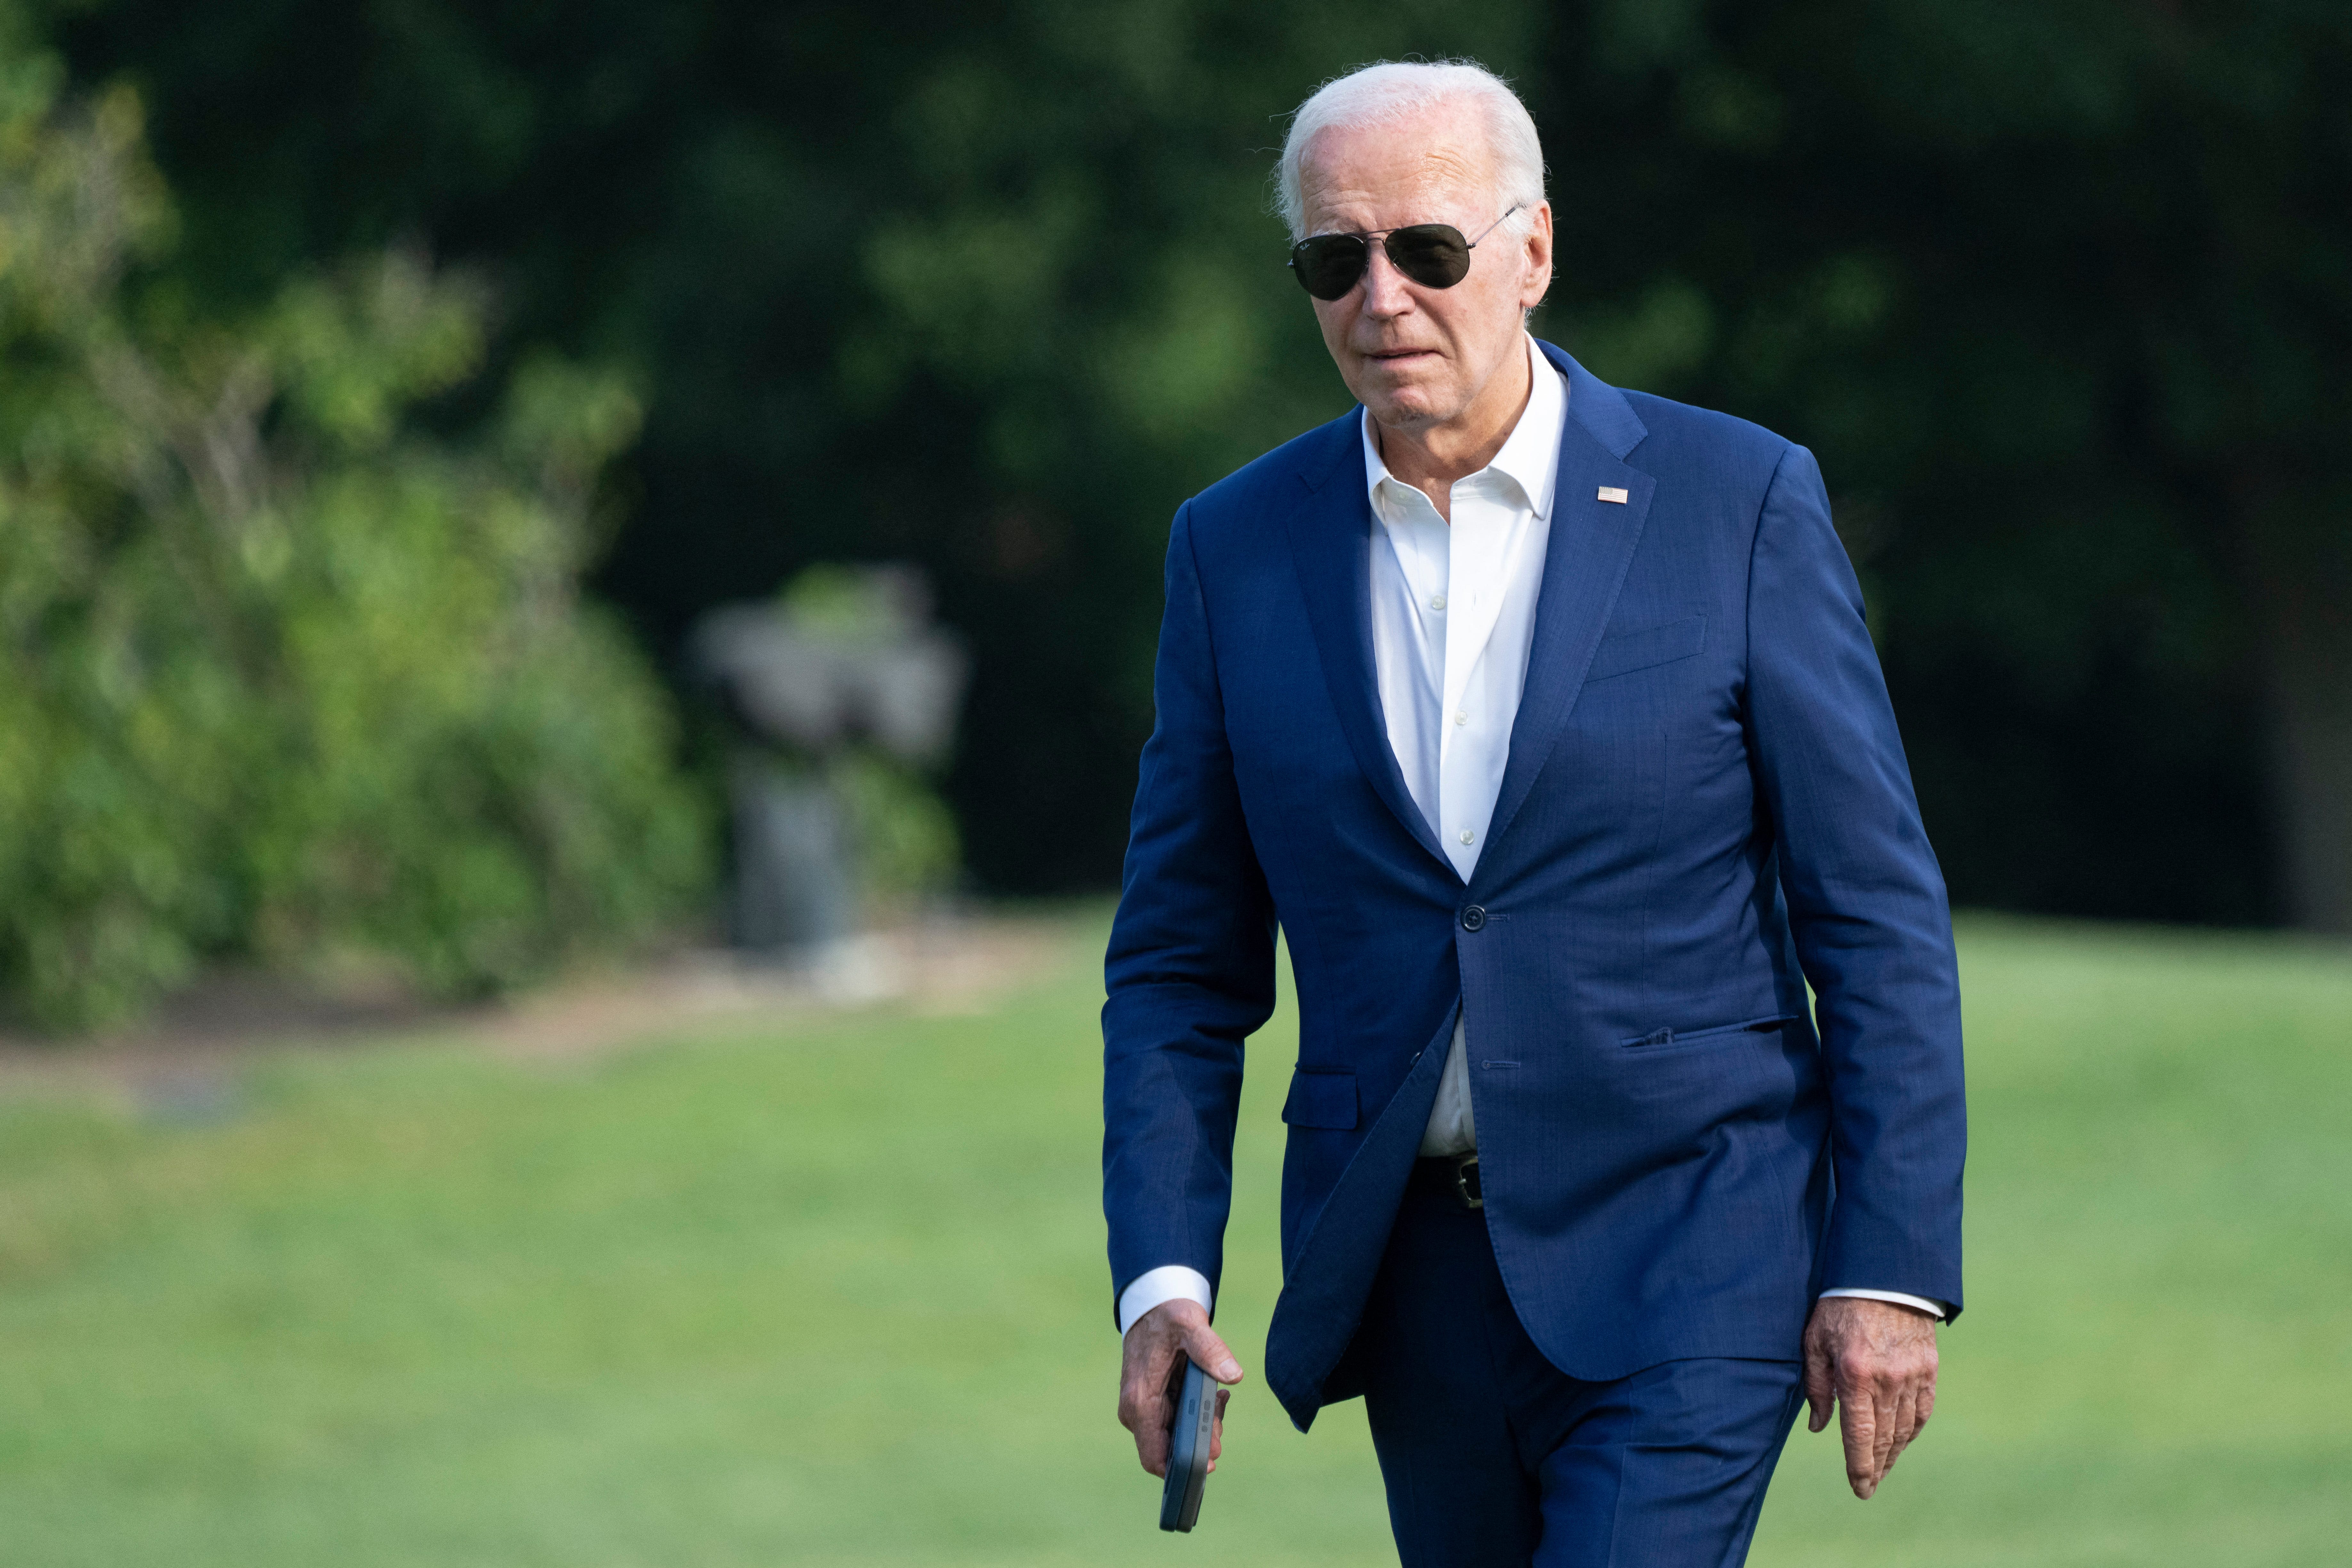 Democrats are in chaos over Biden. It shows they're not ready to lead America.